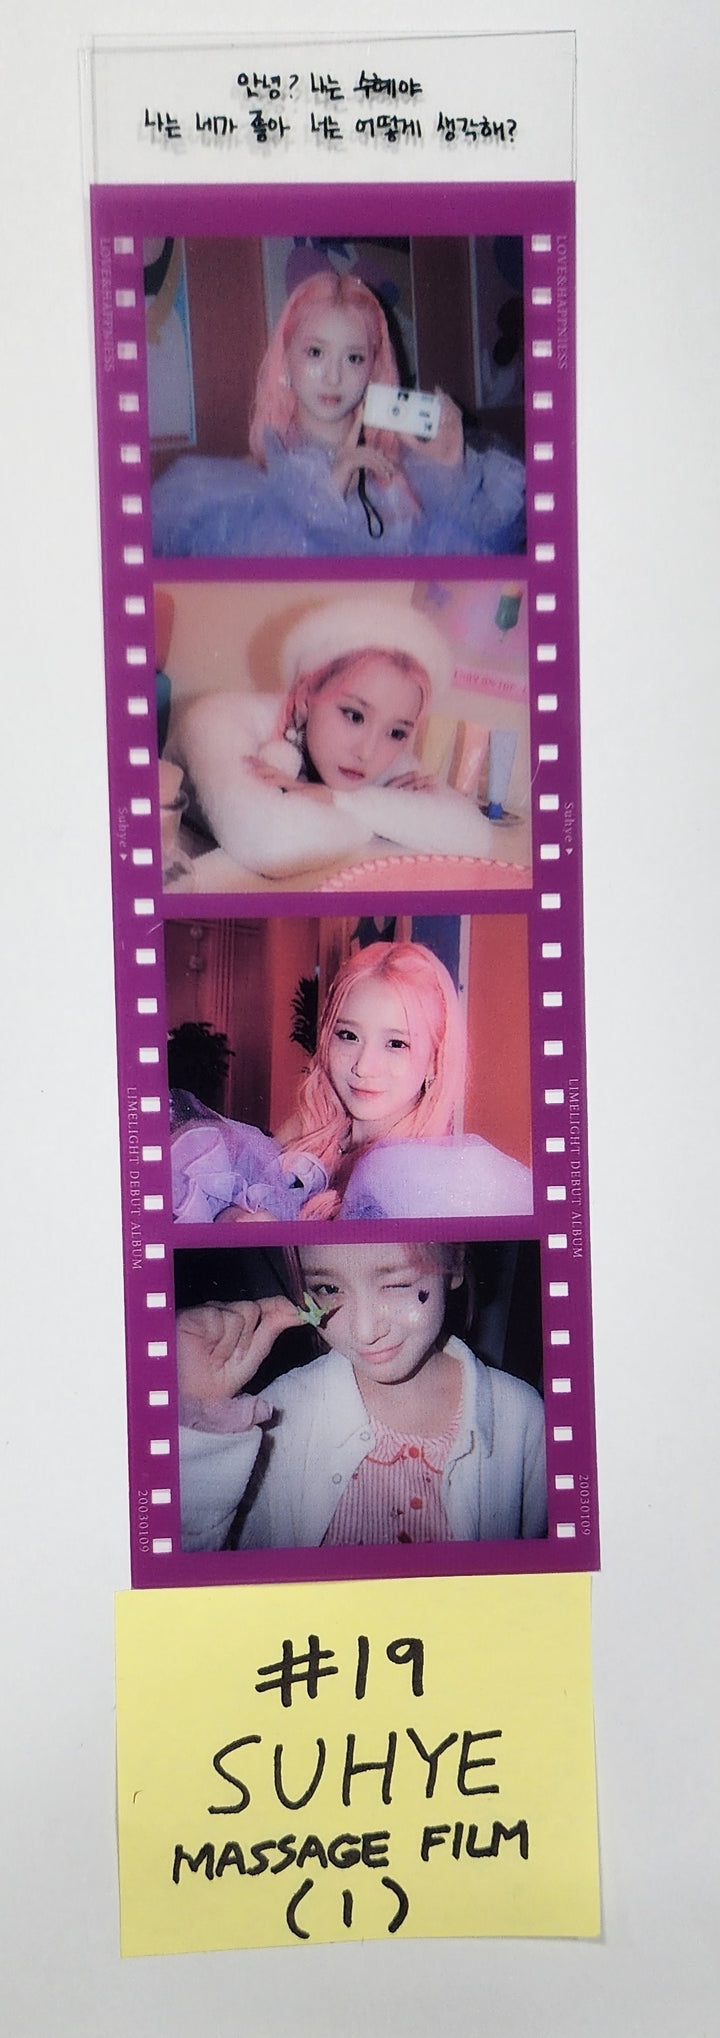 LIMELIGHT "LOVE & HAPPINESS" - Official Photocard, ID Card, Lenticular Photocard, Message Film